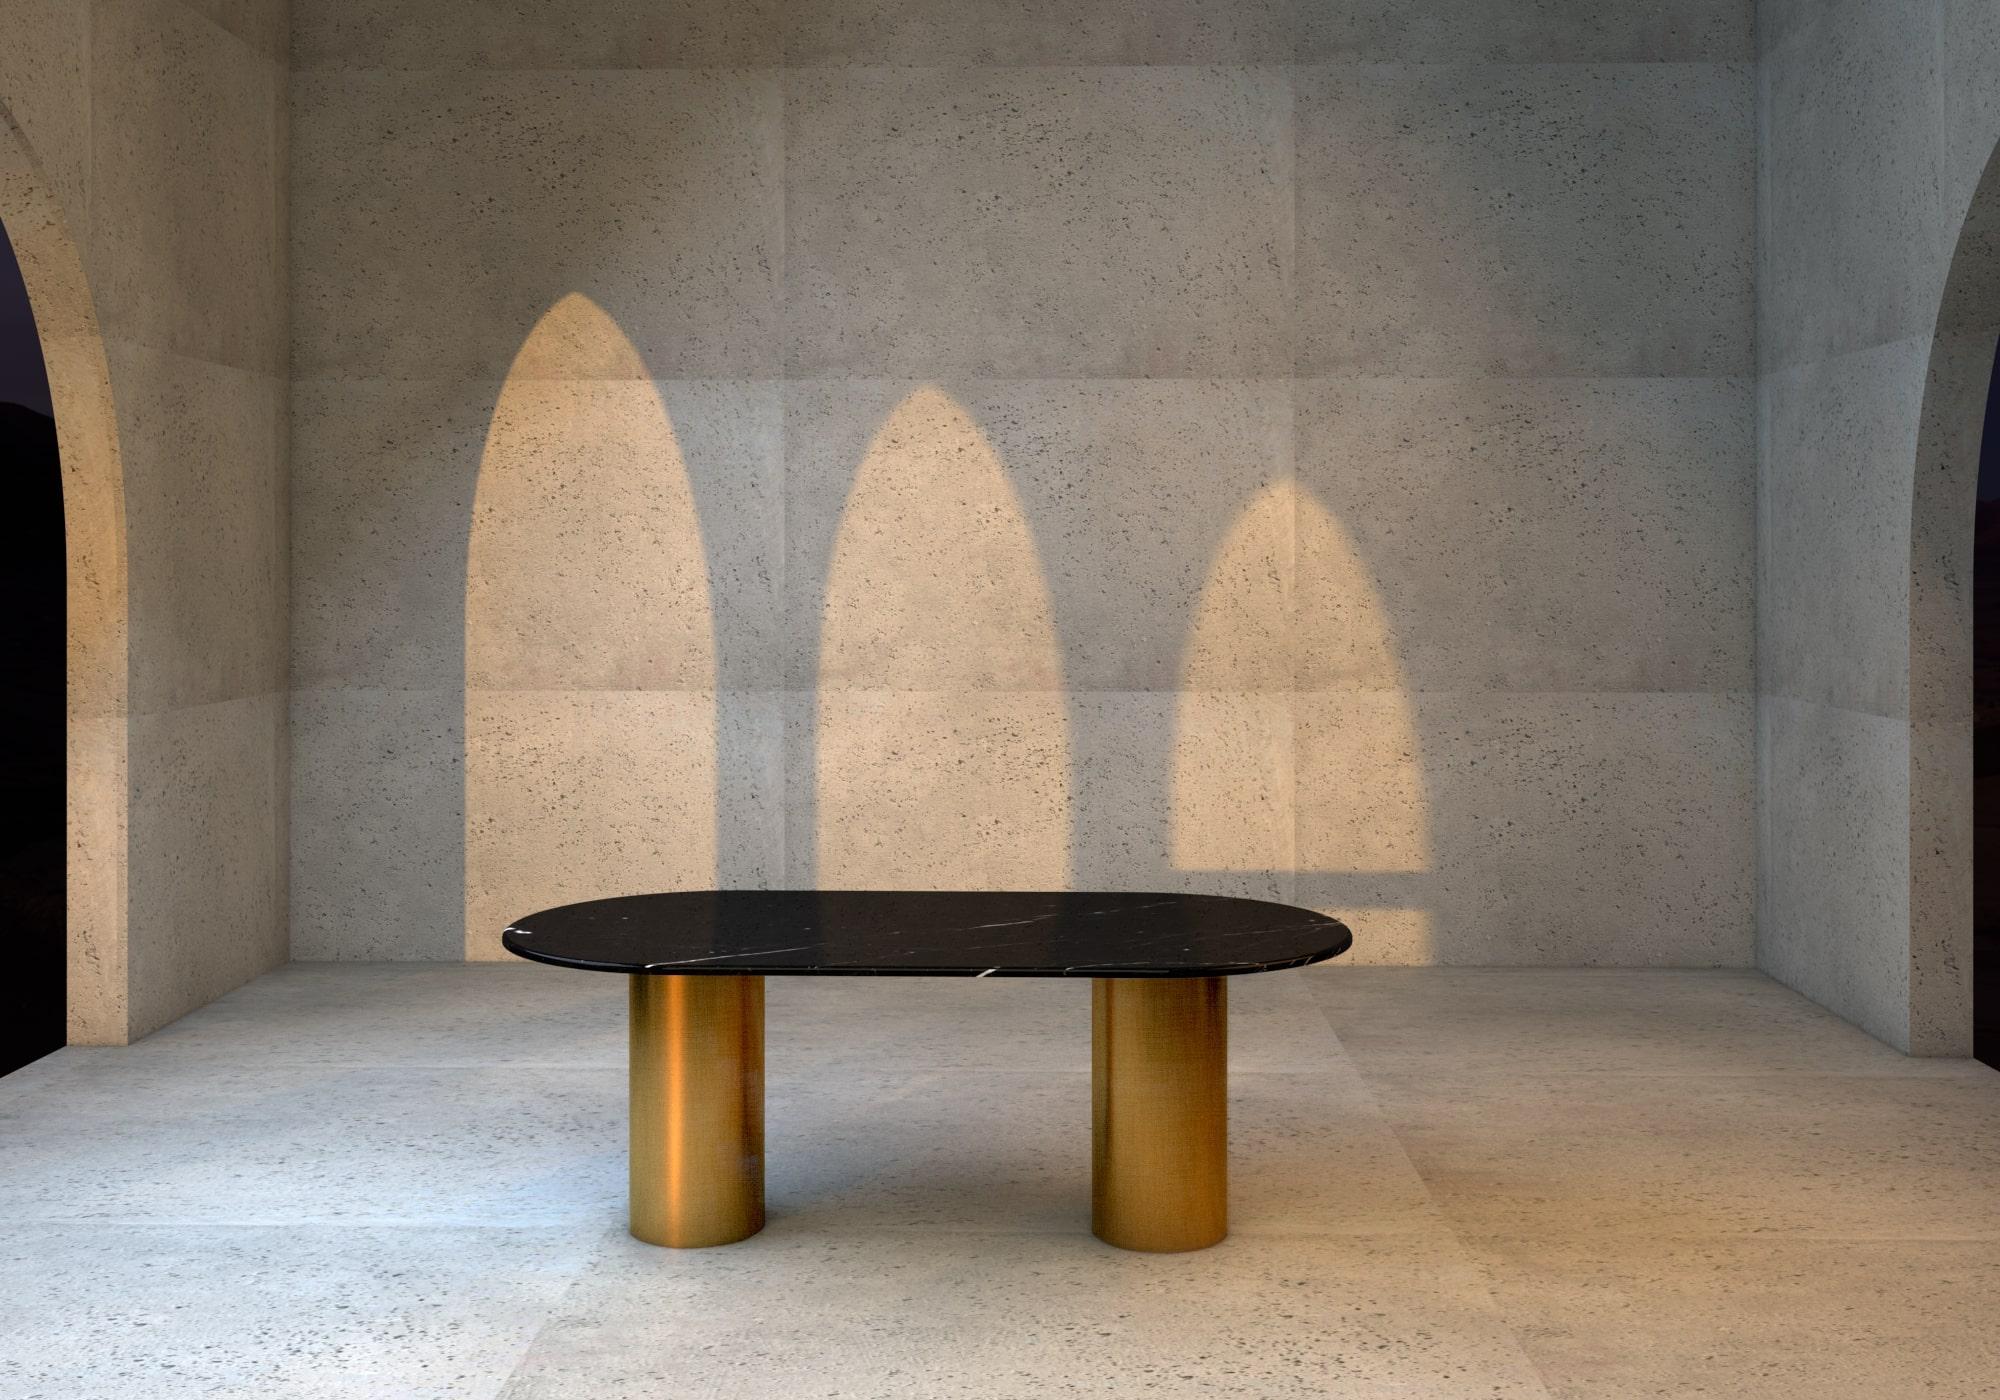 The simple and geometric shapes of the Ovale nq1 dinig table create a sculptural and minimal aesthetic that is fused with a whimsical game between color, material and texture.

The structure is composed by two tubes made of steel, decorated with